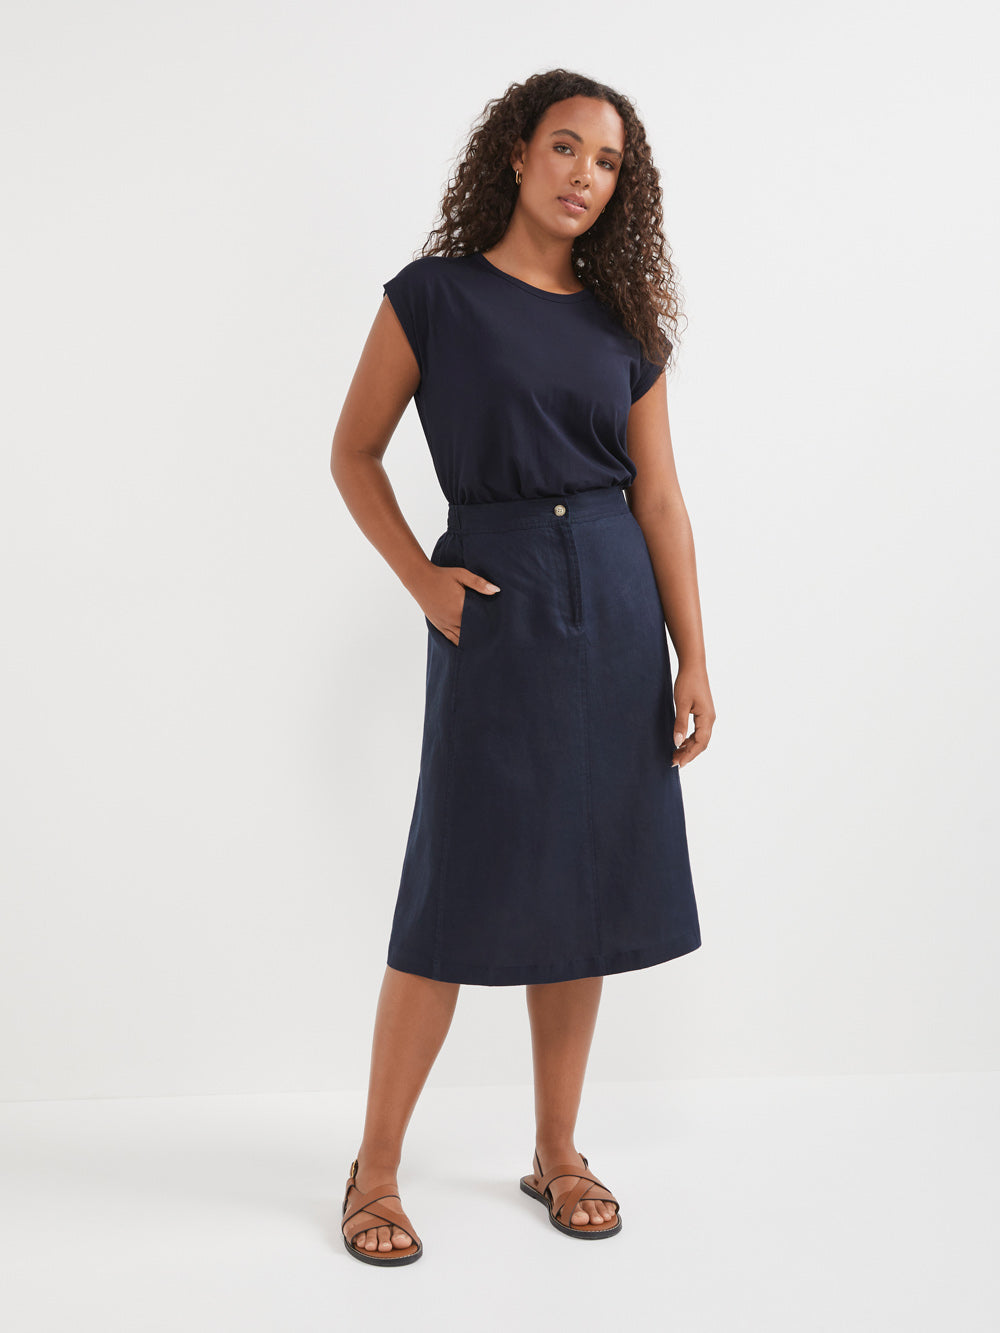 The Washed Linen A-Line Skirt